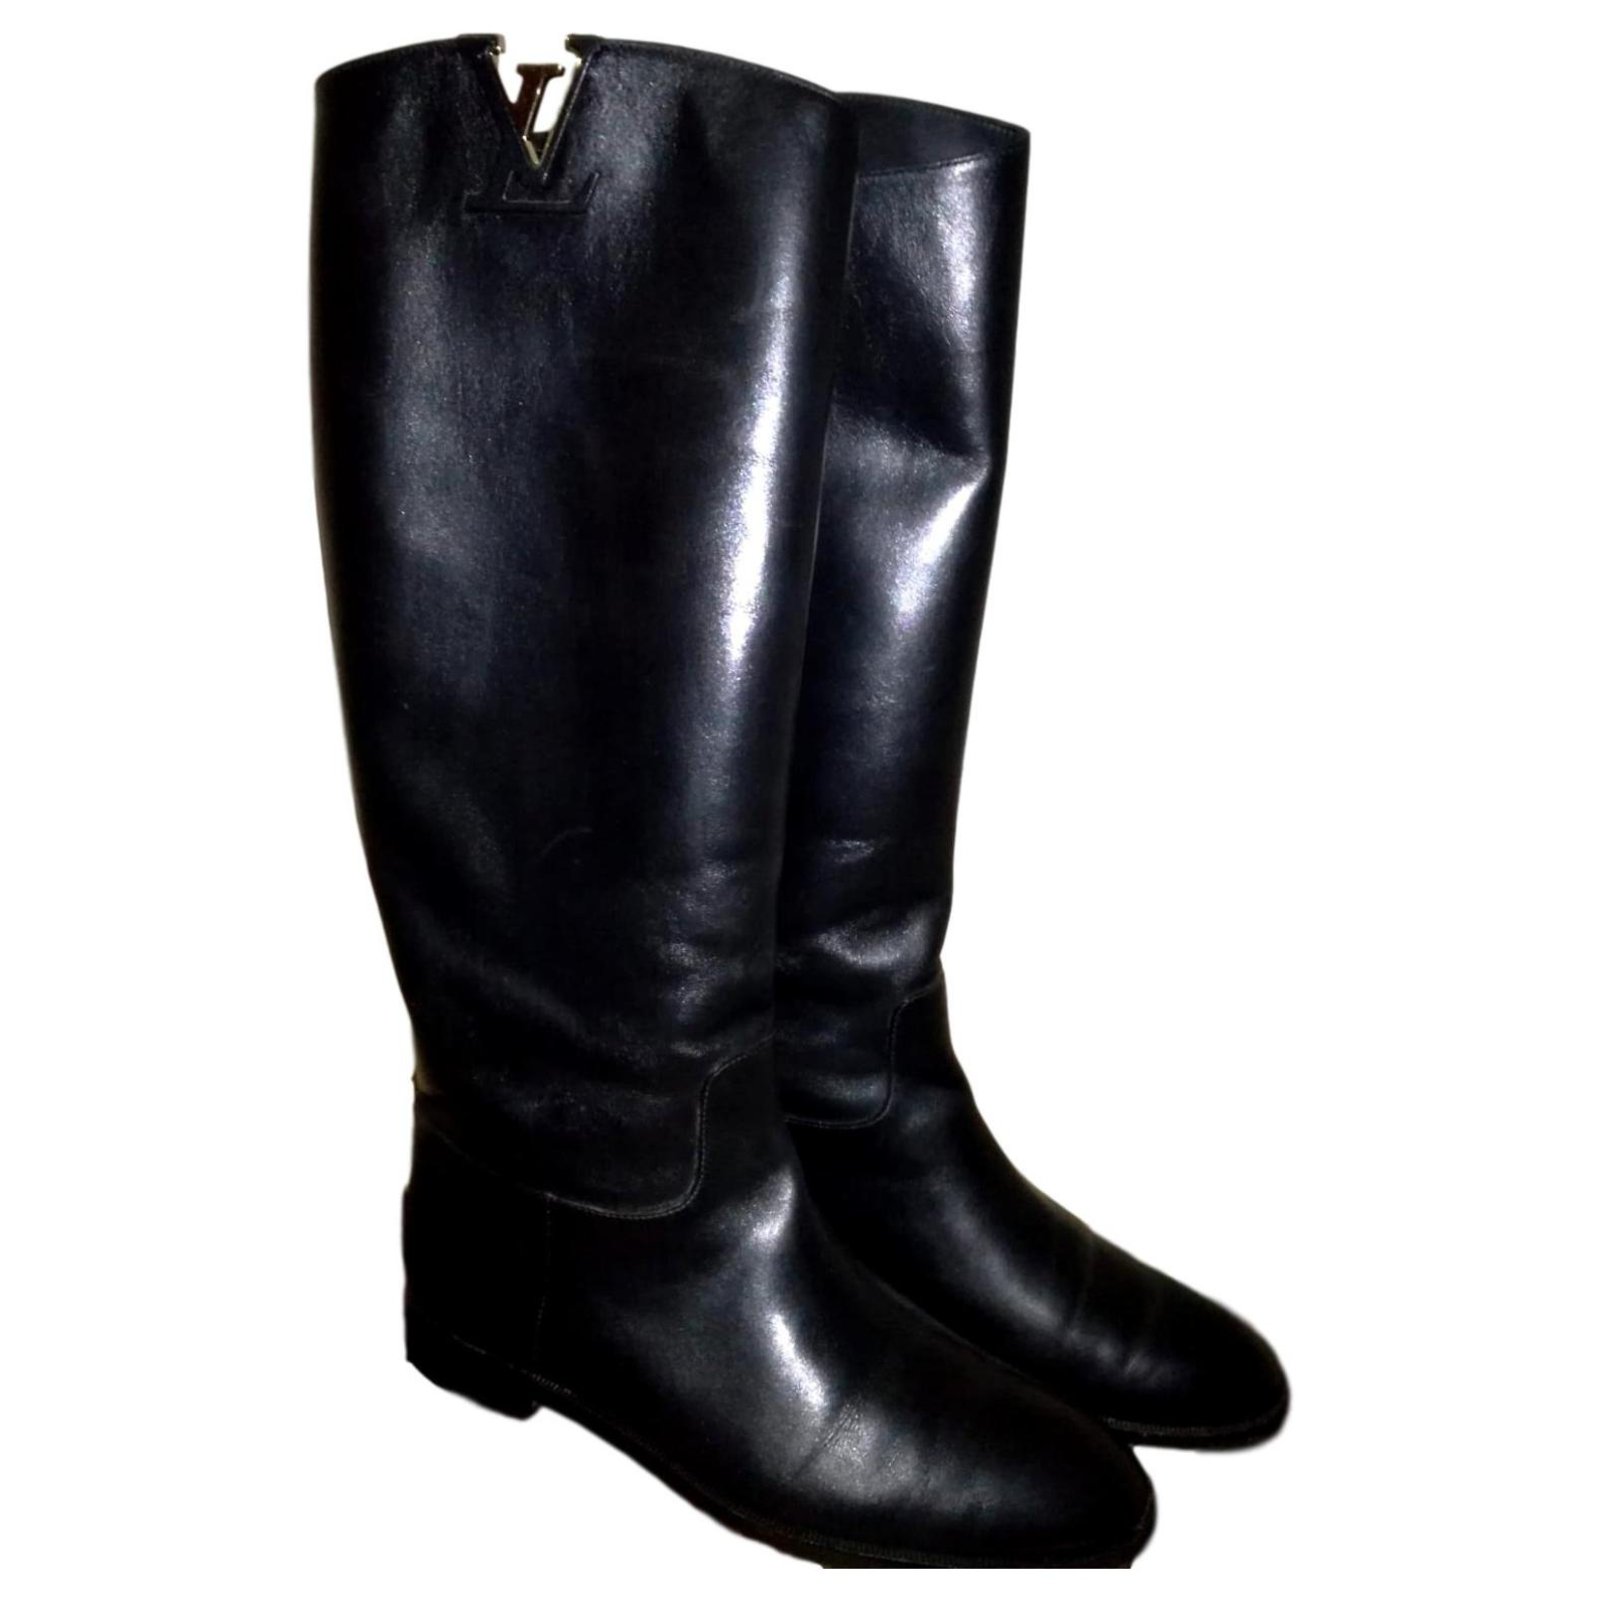 Leather boots Louis Vuitton Black size 39 EU in Leather - 36456164